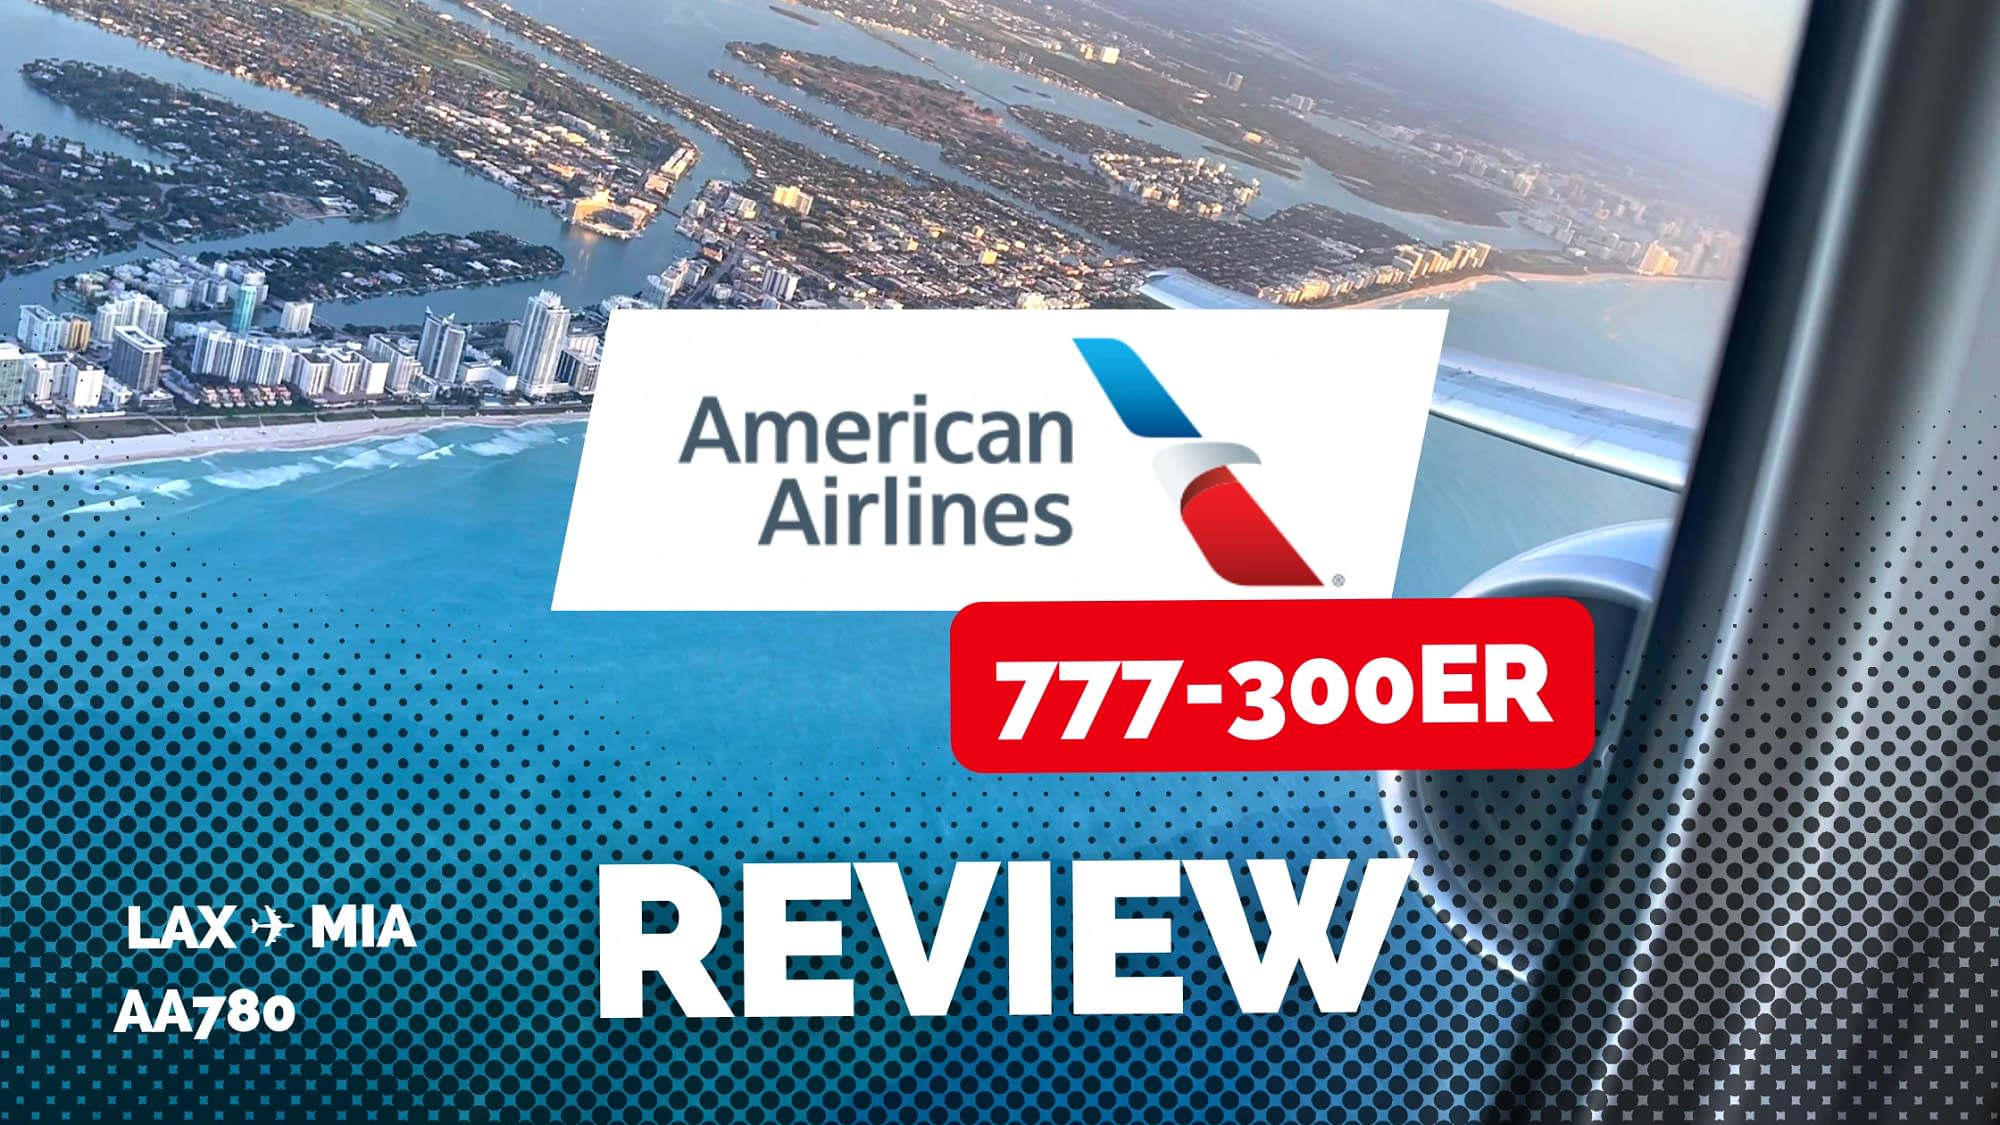 American Airlines Flagship First Class 777-300ER (Review)